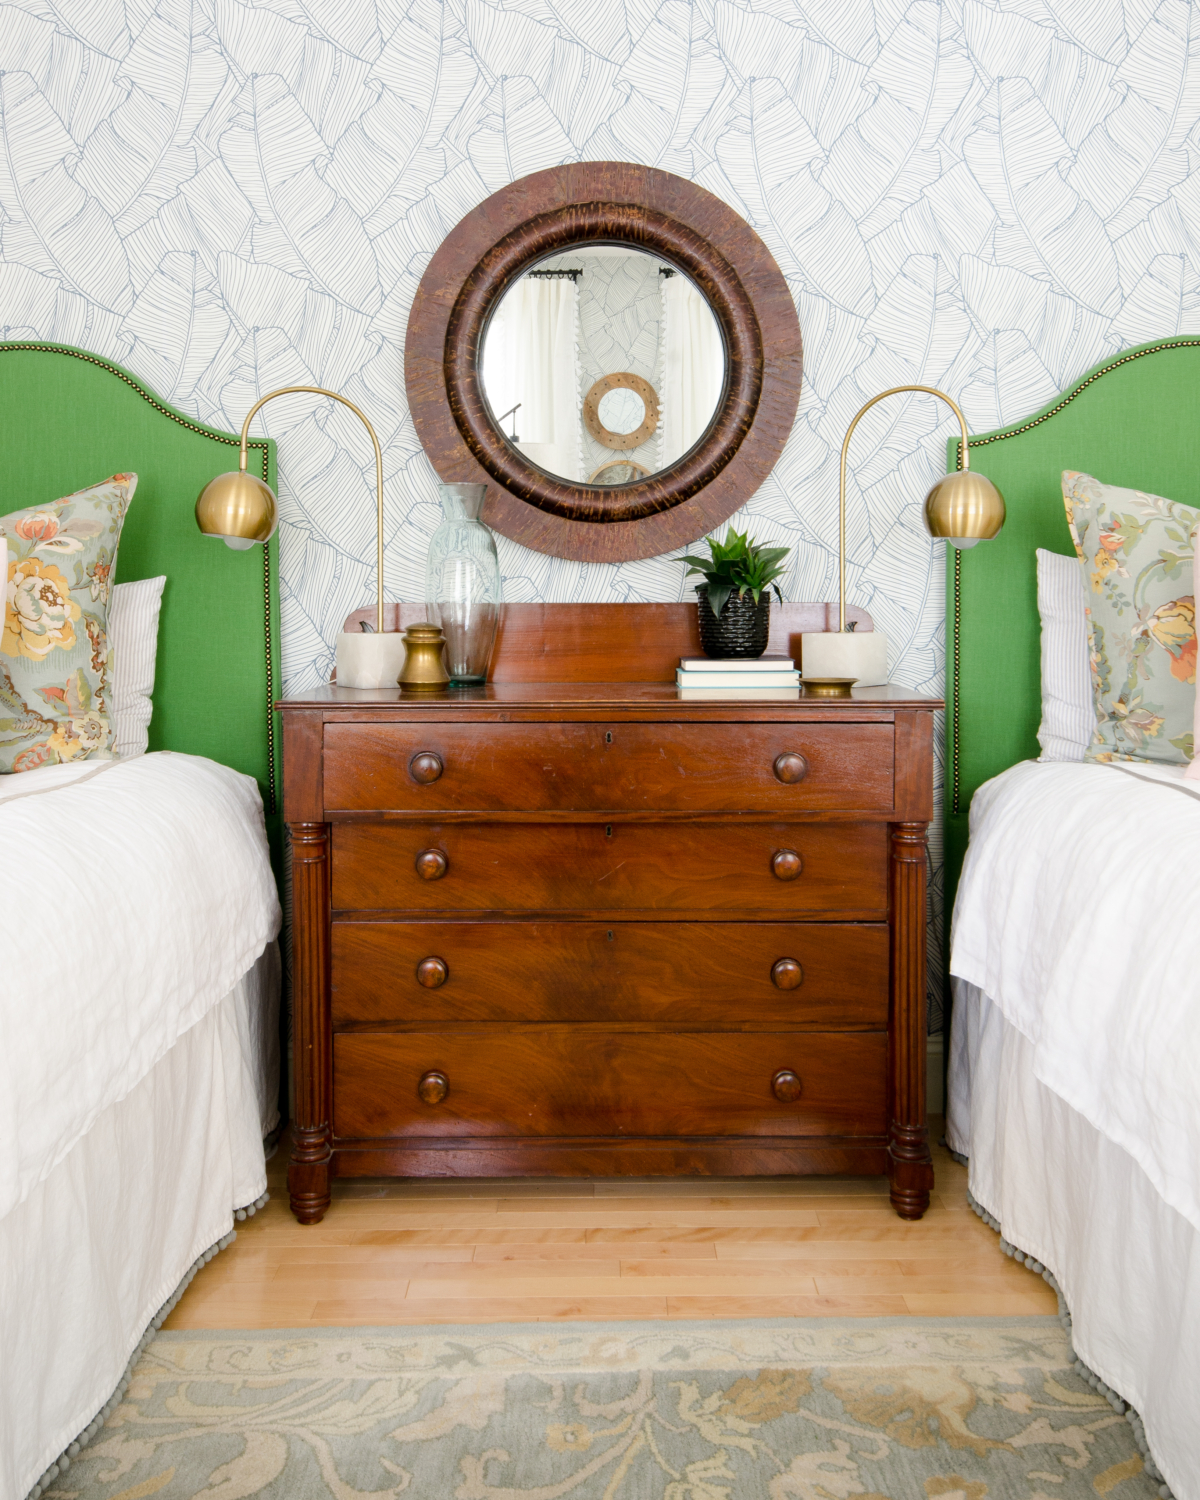 Gorgeous guest room with palm wallpaper, green linen headboards, mustard yellow leather benches, and accents of blush and coral